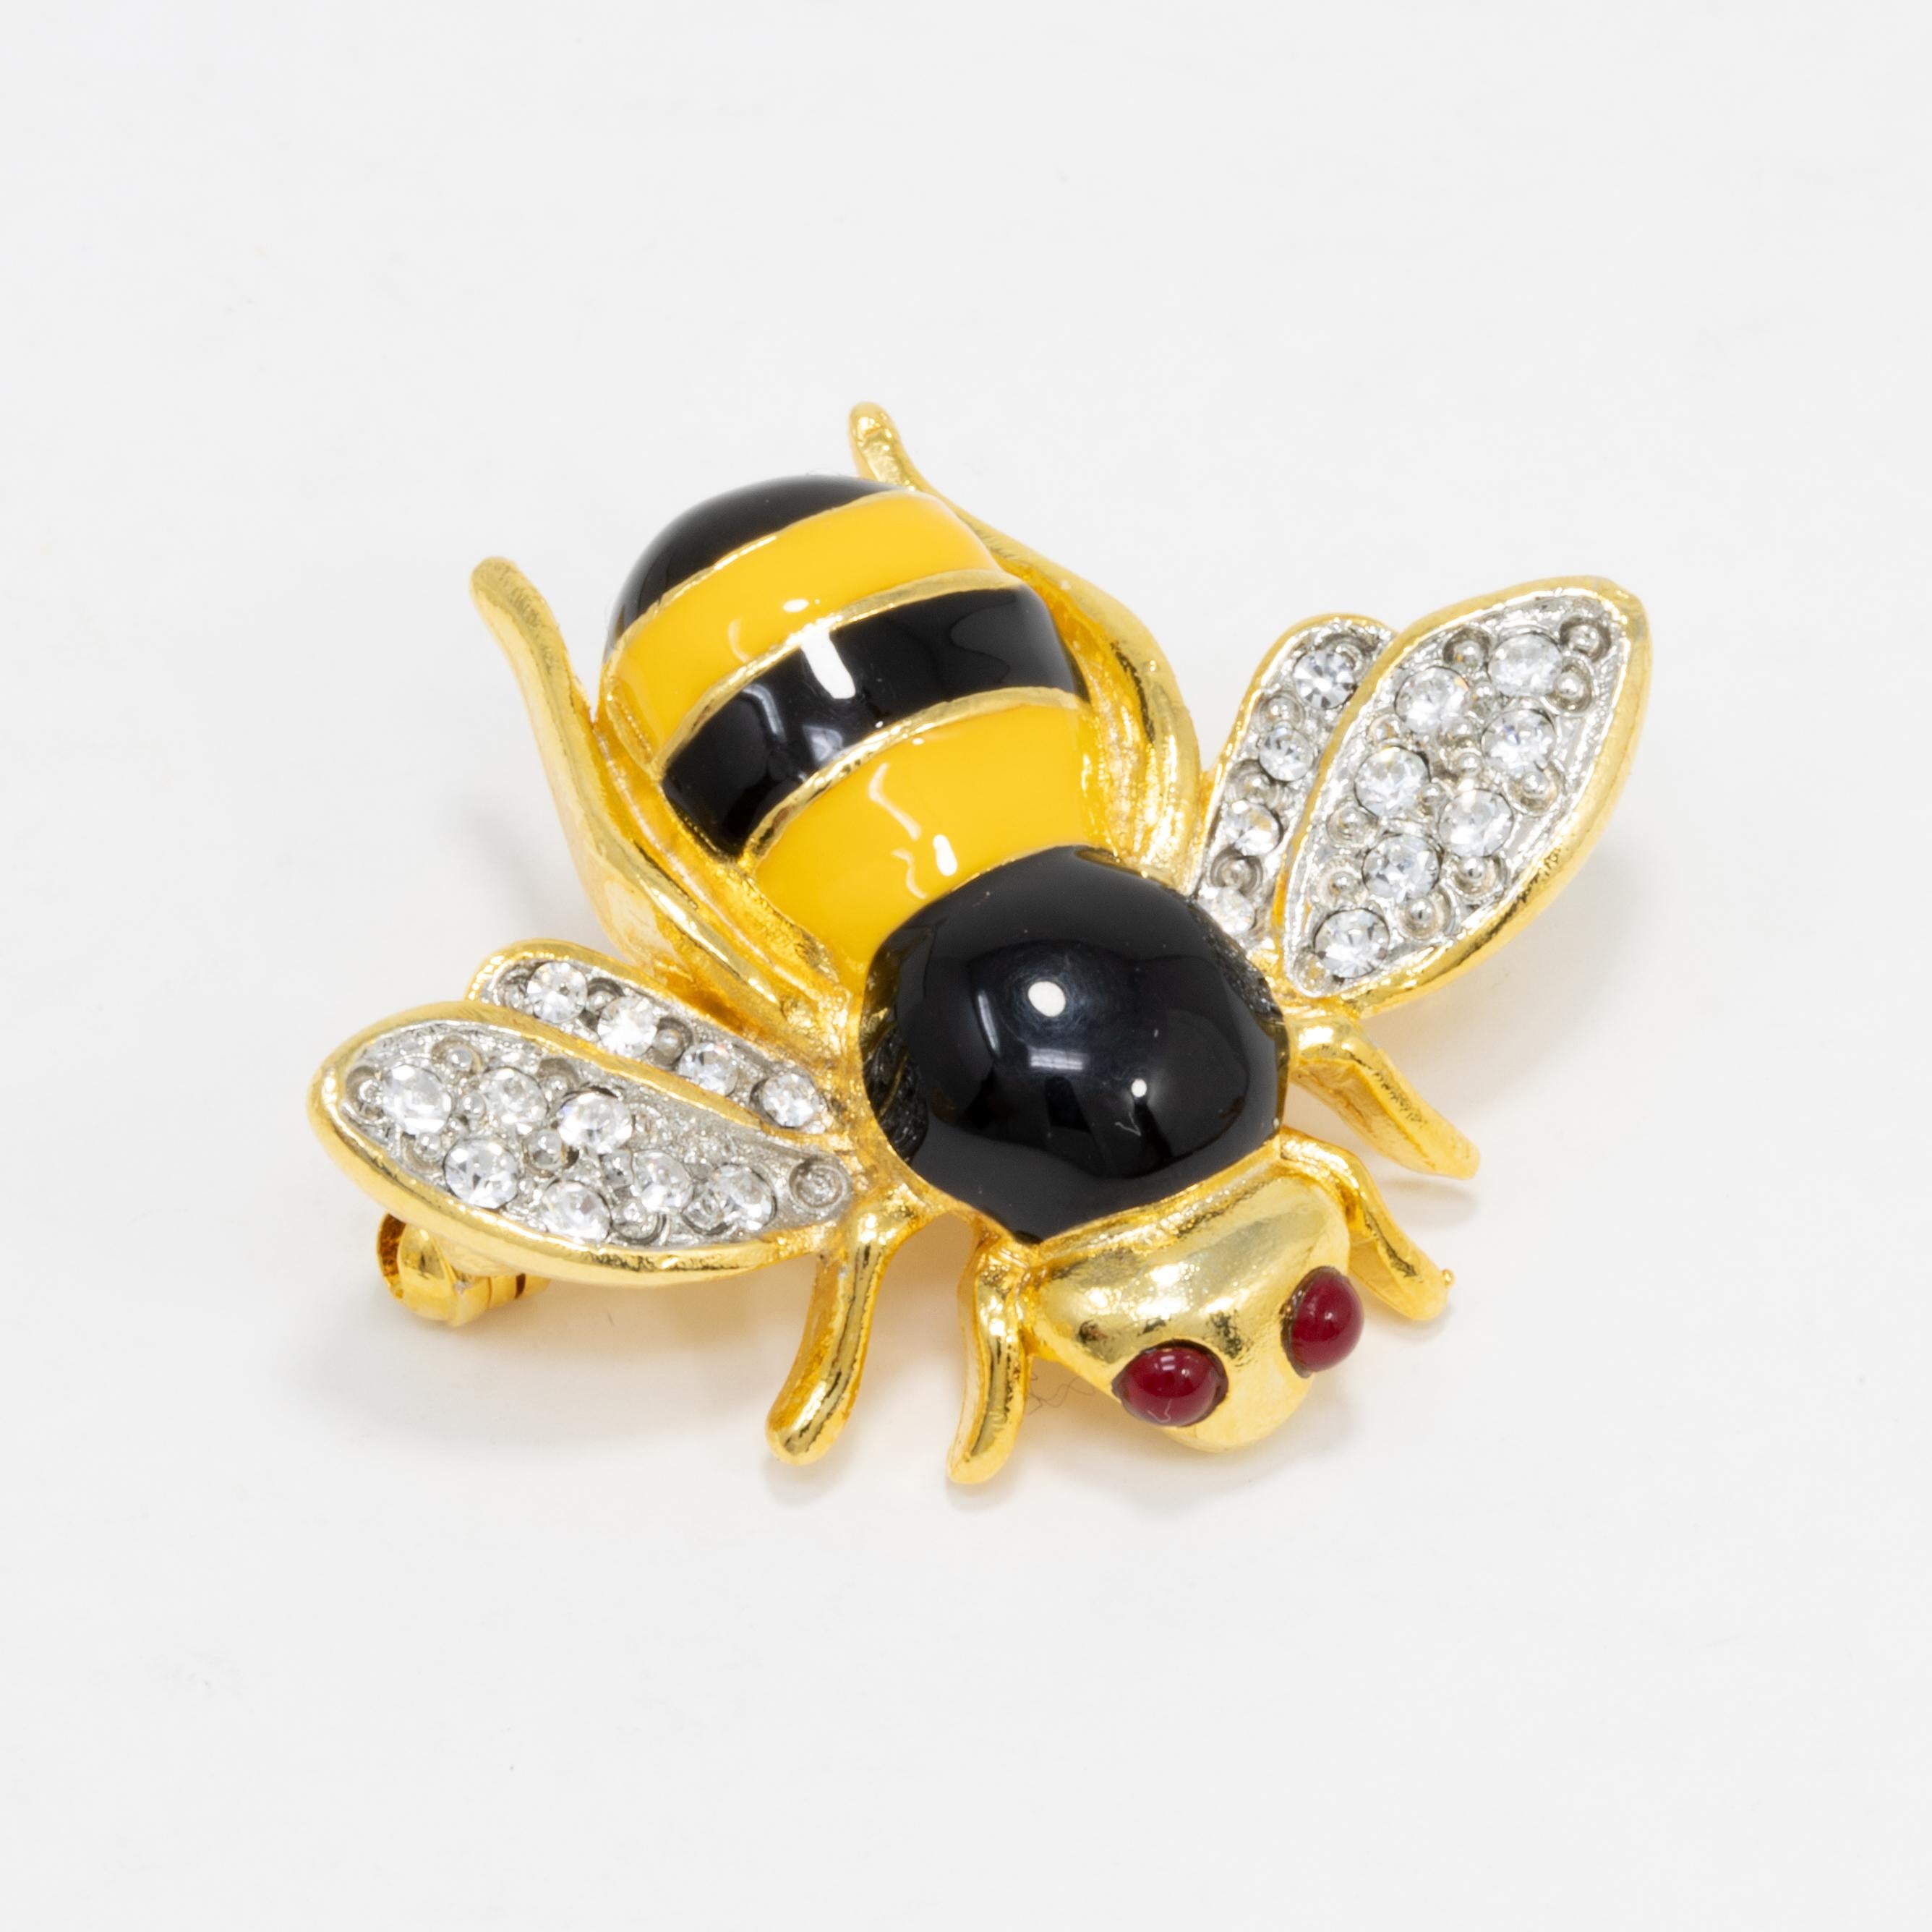 A whimsical bee pin by Kenneth Jay Lane. This stylish critter is decorated with clear crystals and black & yellow enamel.

Gold plated.

Marks / hallmarks / etc: Kenneth Lane, Made in USA